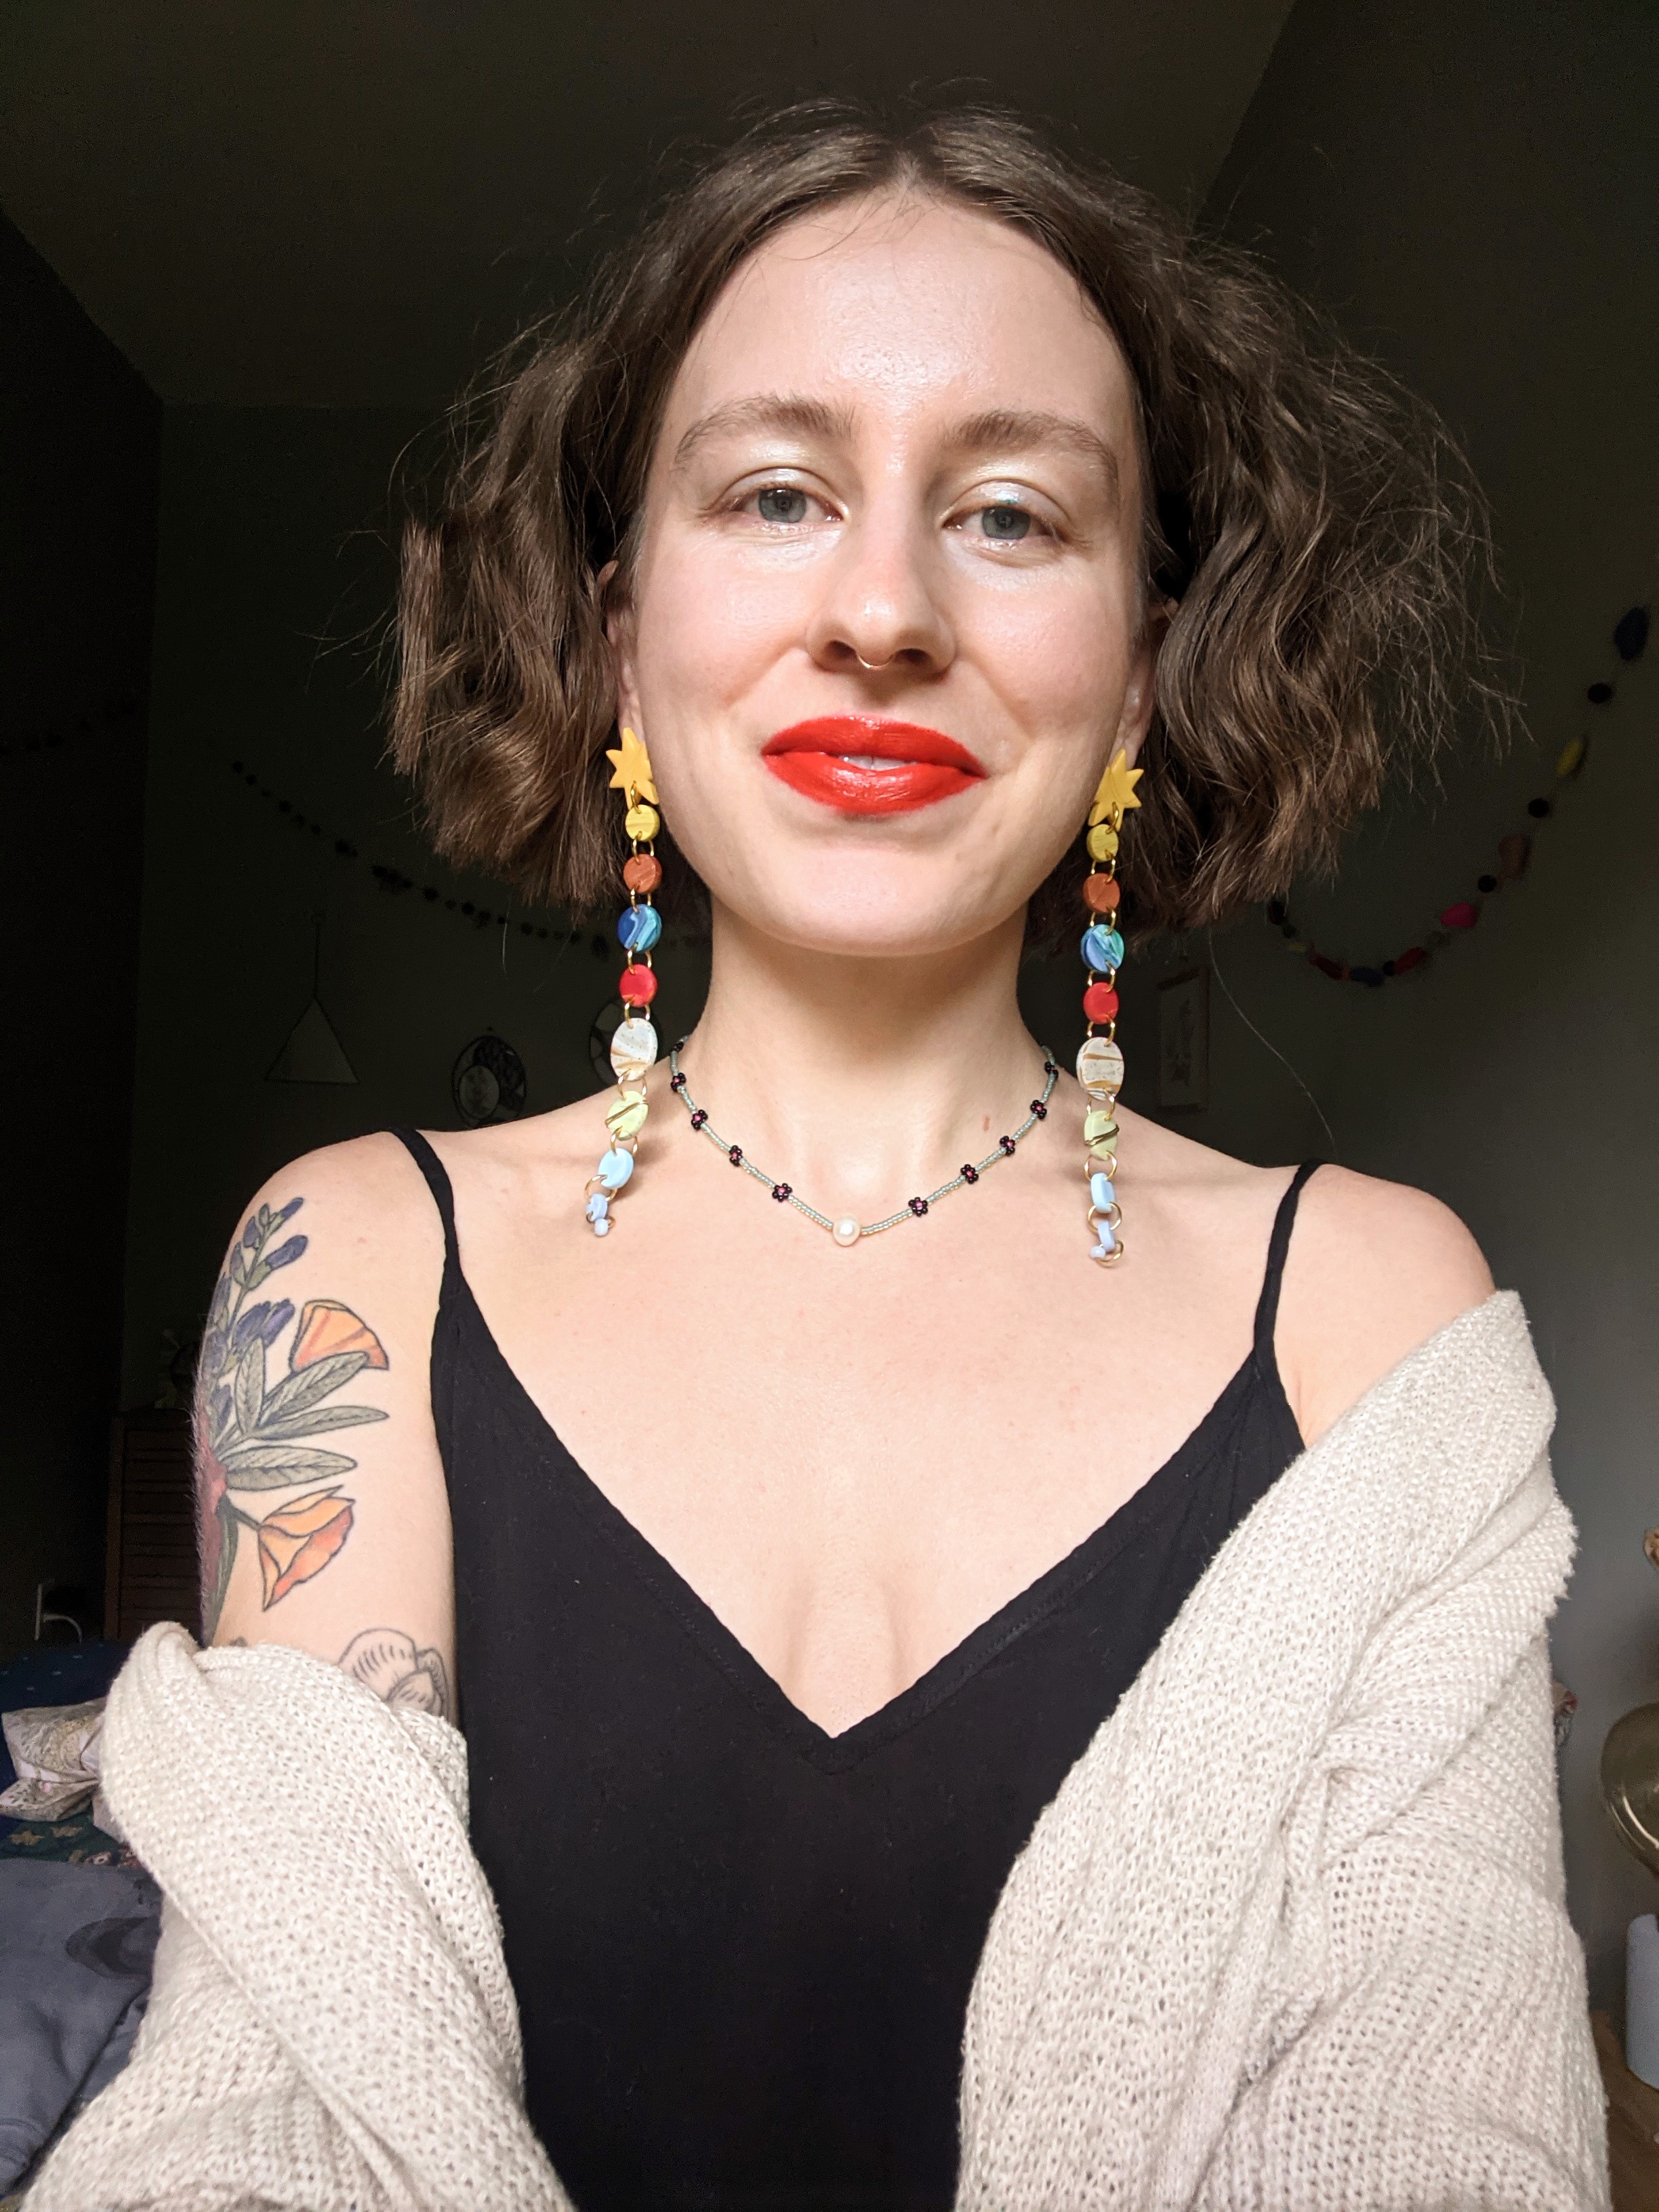 Photo of Kimberlea Ruffu set against a dark background. She is wearing a black shirt and beige sweater, and has dangly earrings and bright red lipstick. 